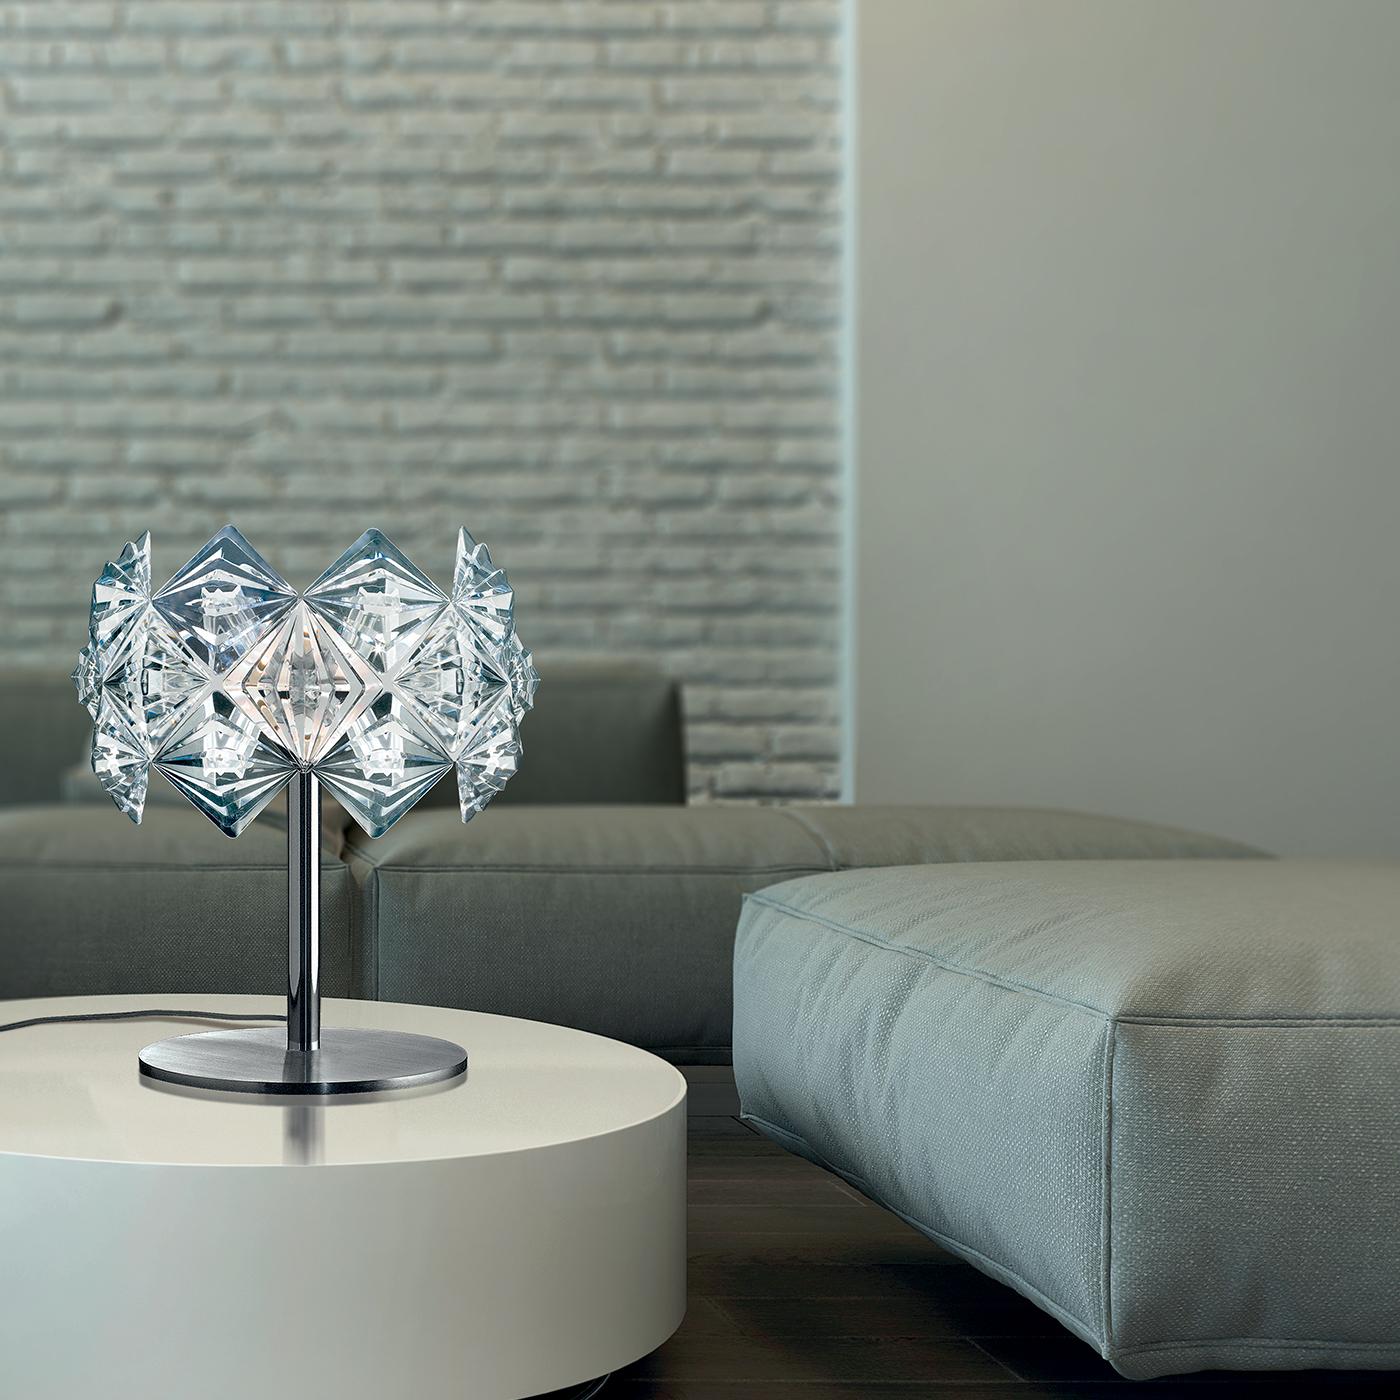 A fabulous table lamp, the 0820/LP features a circular shade in clear faceted methacrylate. Creating a stunning and innovative design, the shade is complimented by a simple shaft and round base that may be finished in either chrome or 24-karat gold.